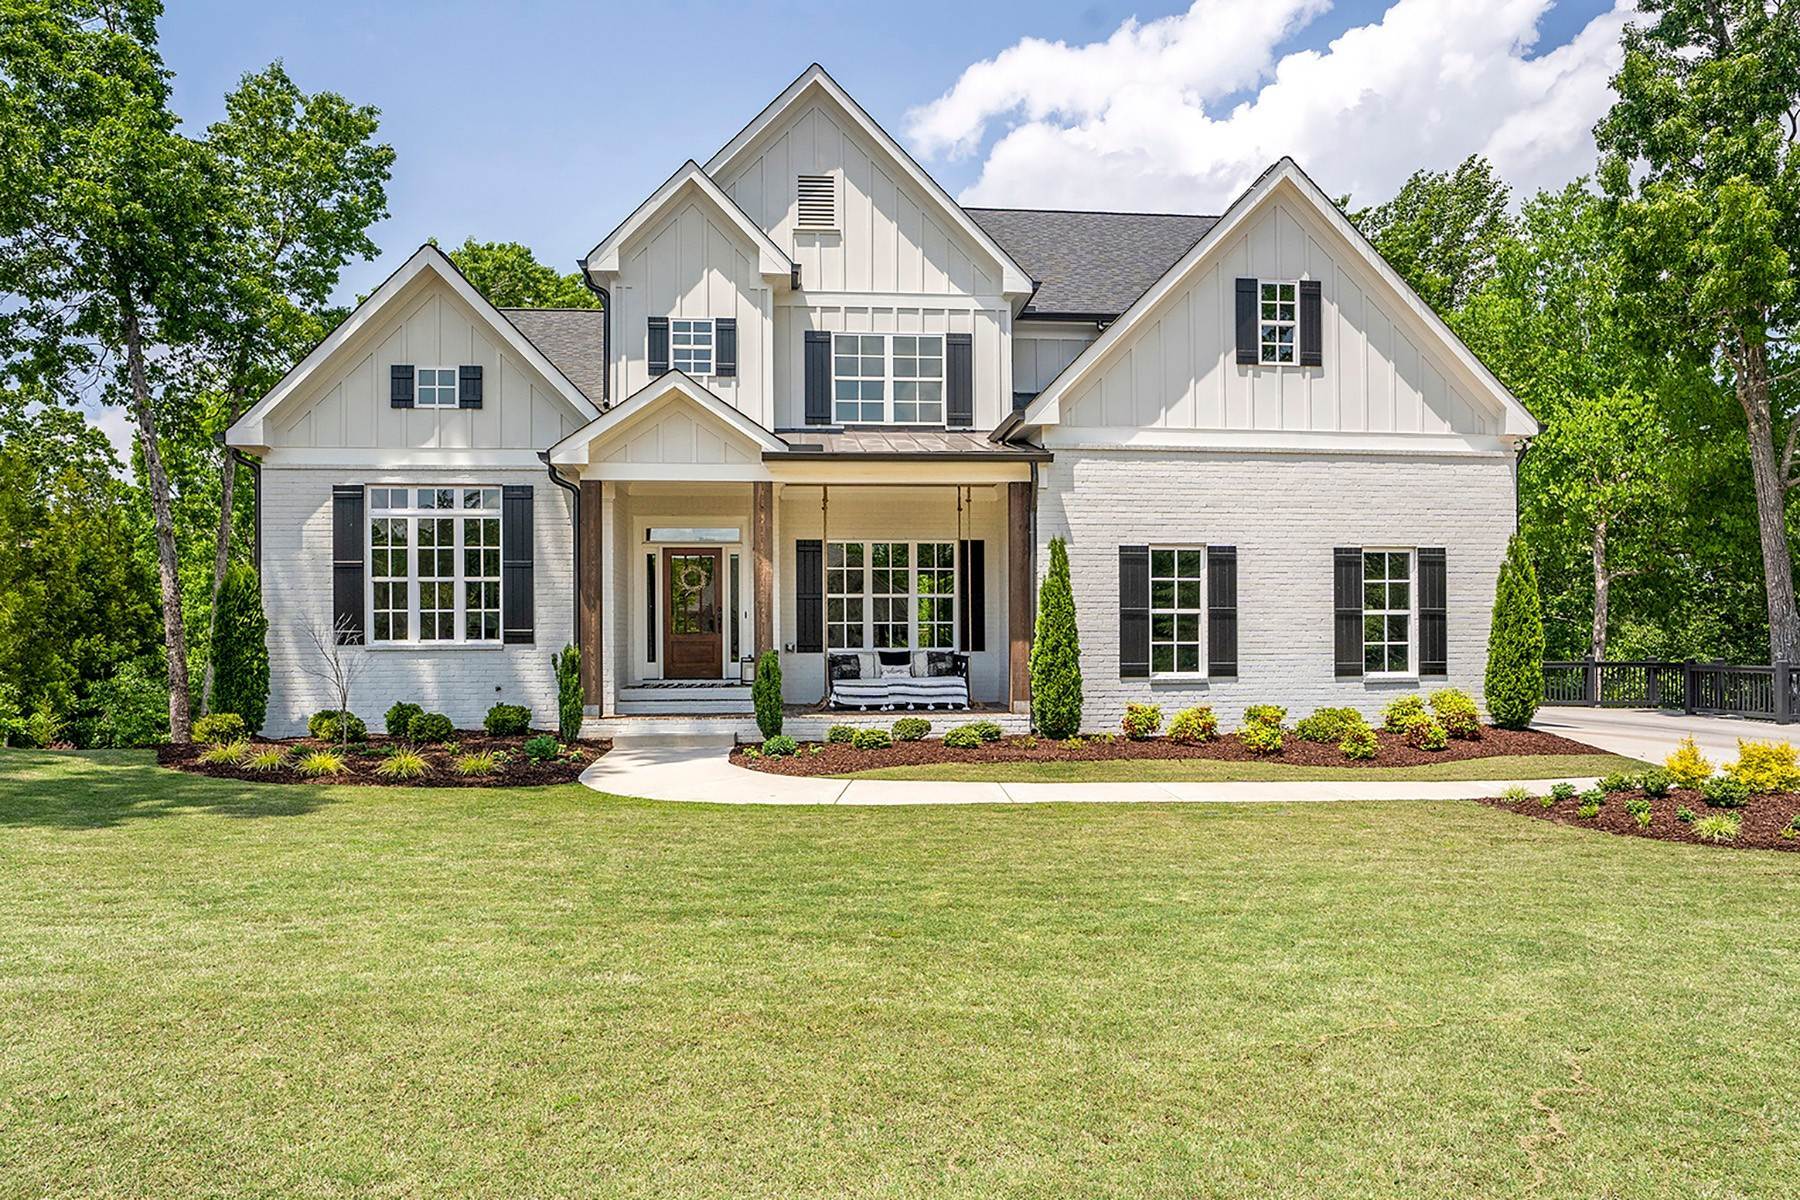 Single Family Homes for Sale at Modern Farmhouse in Desirable Gated Community 13133 Overlook Pass Roswell, Georgia 30075 United States